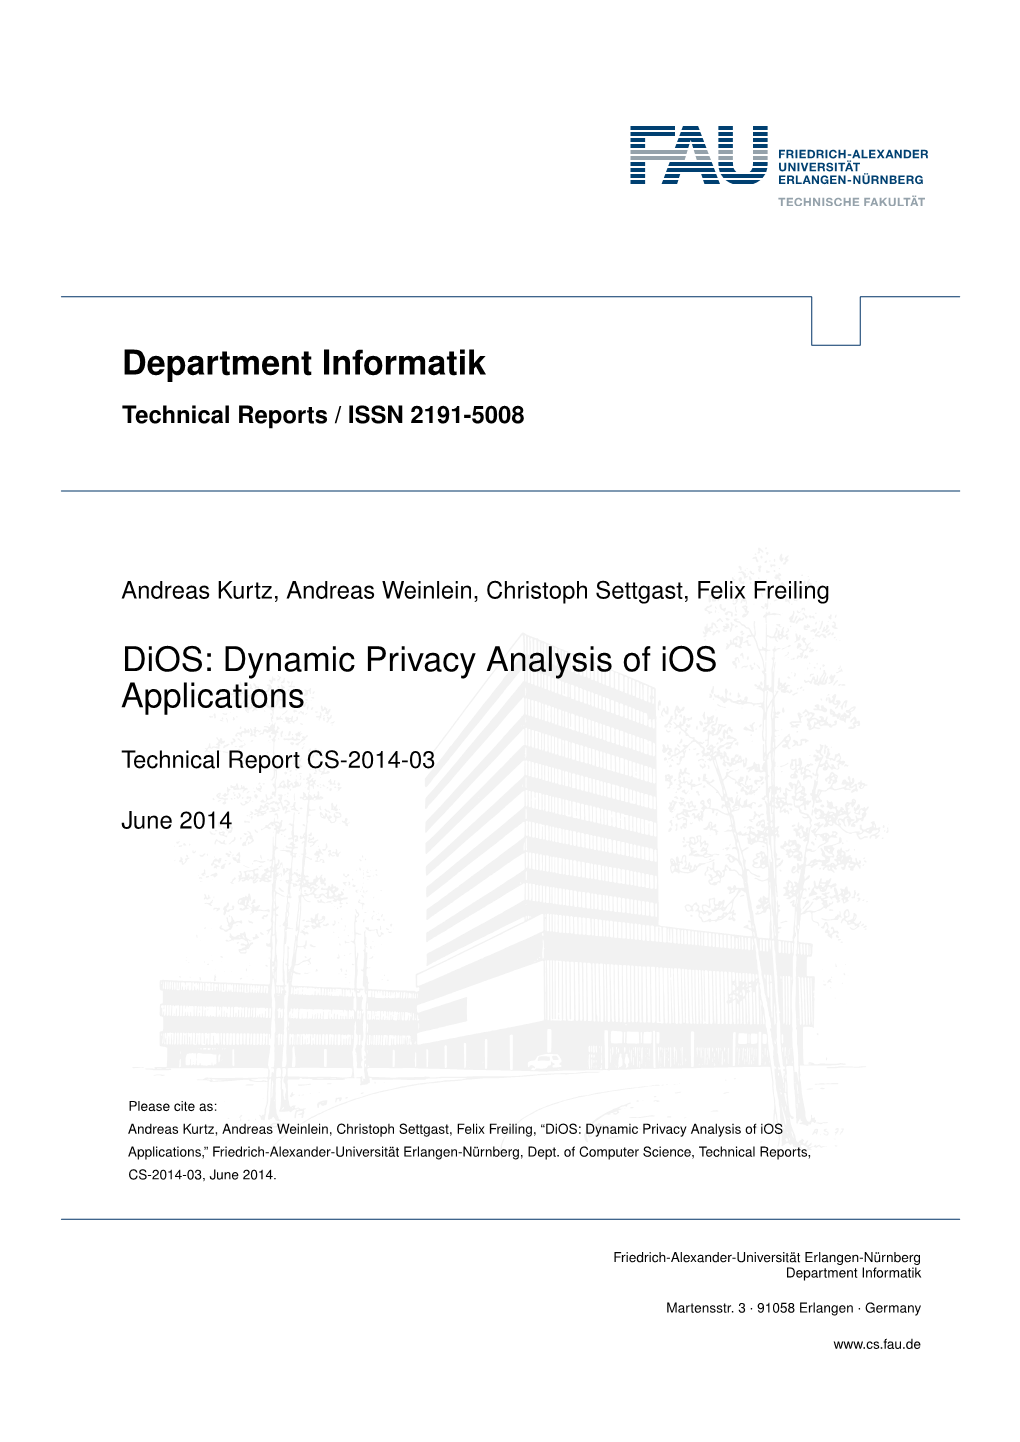 Dios: Dynamic Privacy Analysis of Ios Applications